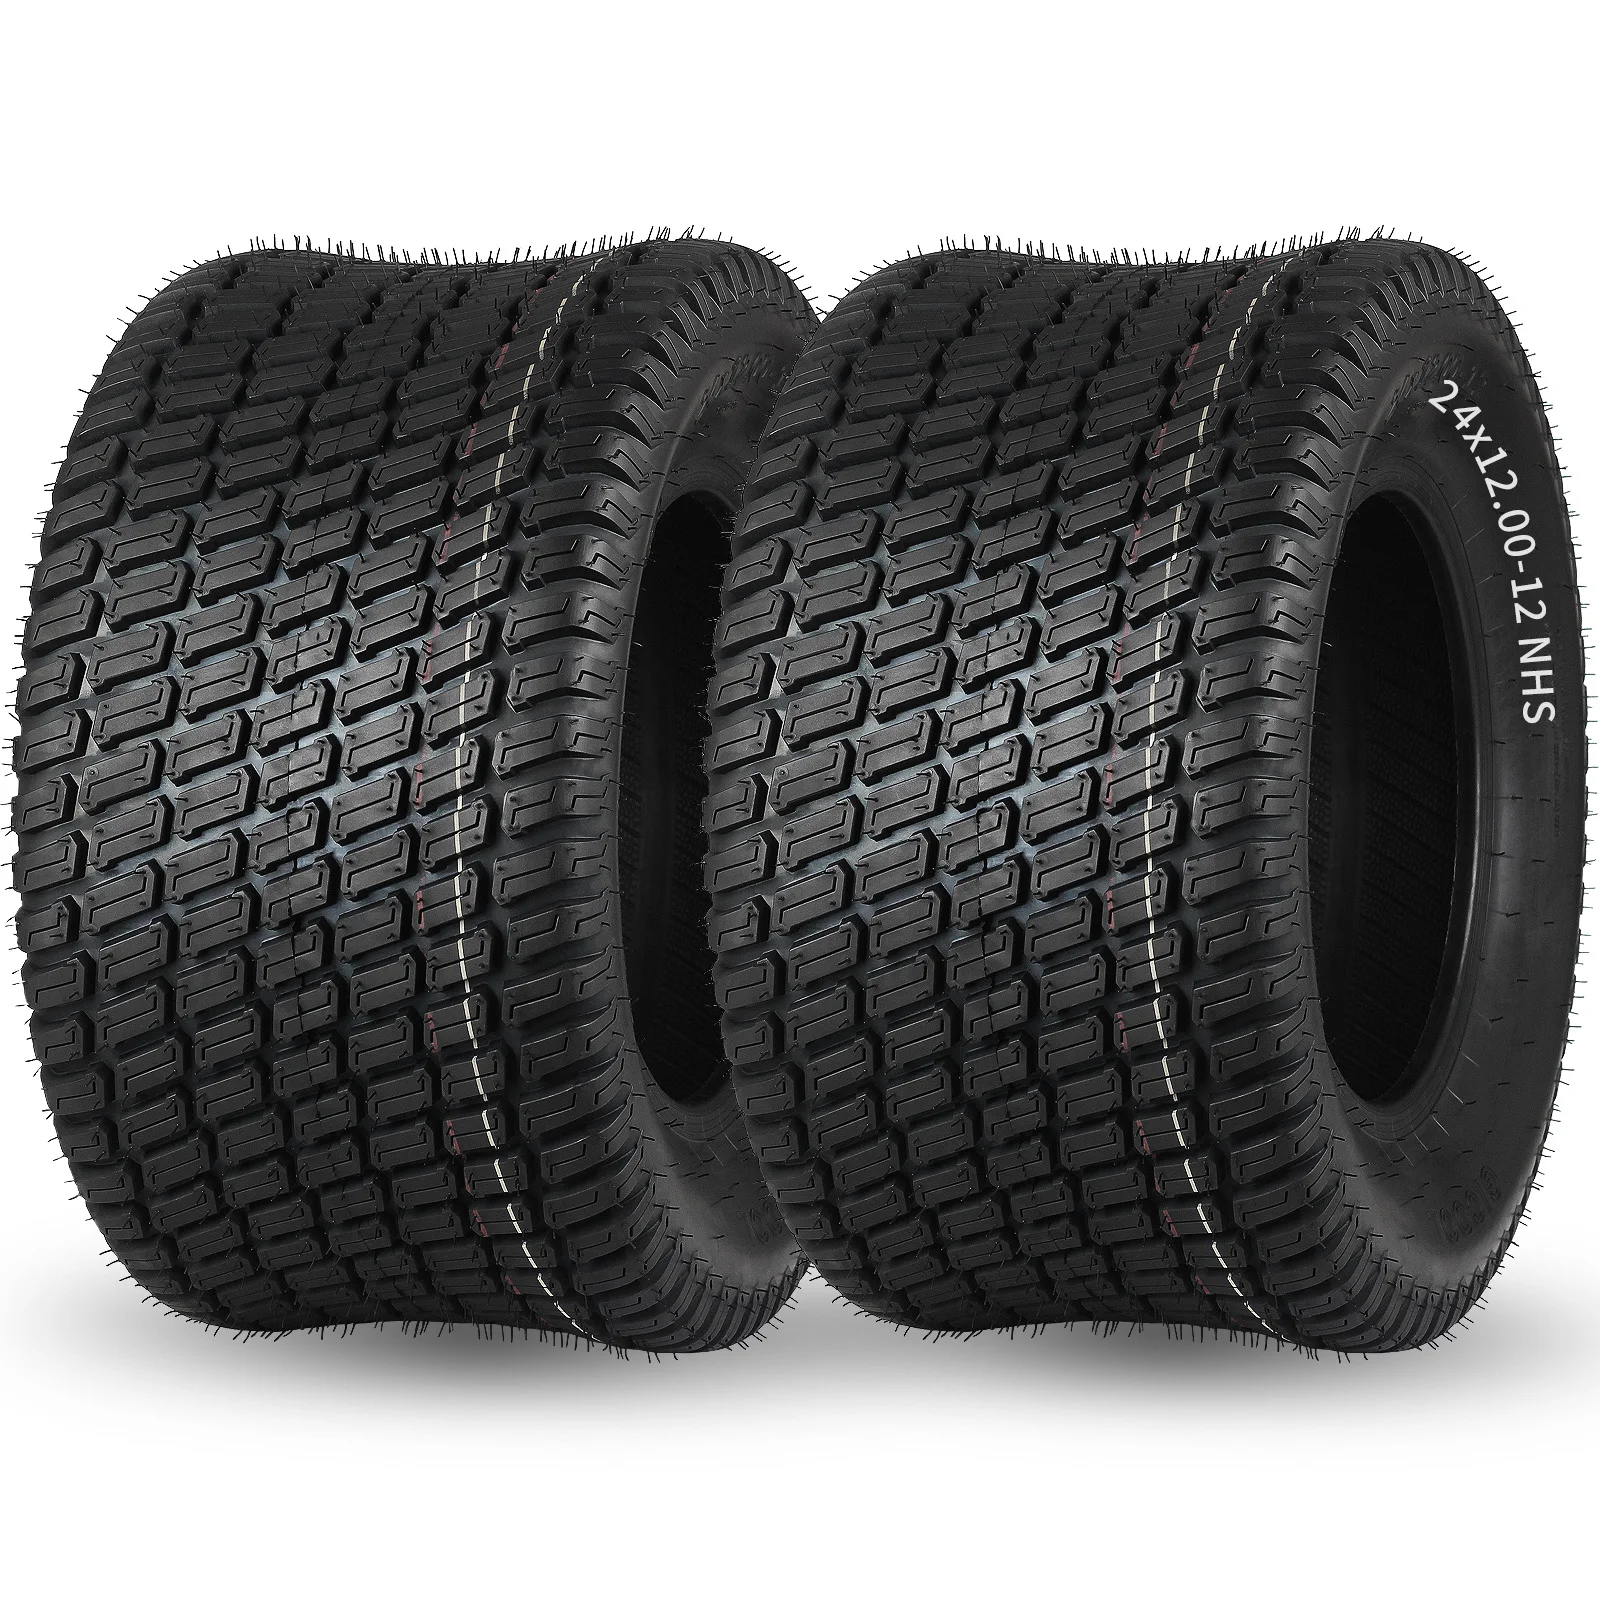 24 x 12.00-12 Turf-S Pattern Lawn Mower Tire, 24x12-12 for Tractor Riding Lawnmowers, 4 Ply